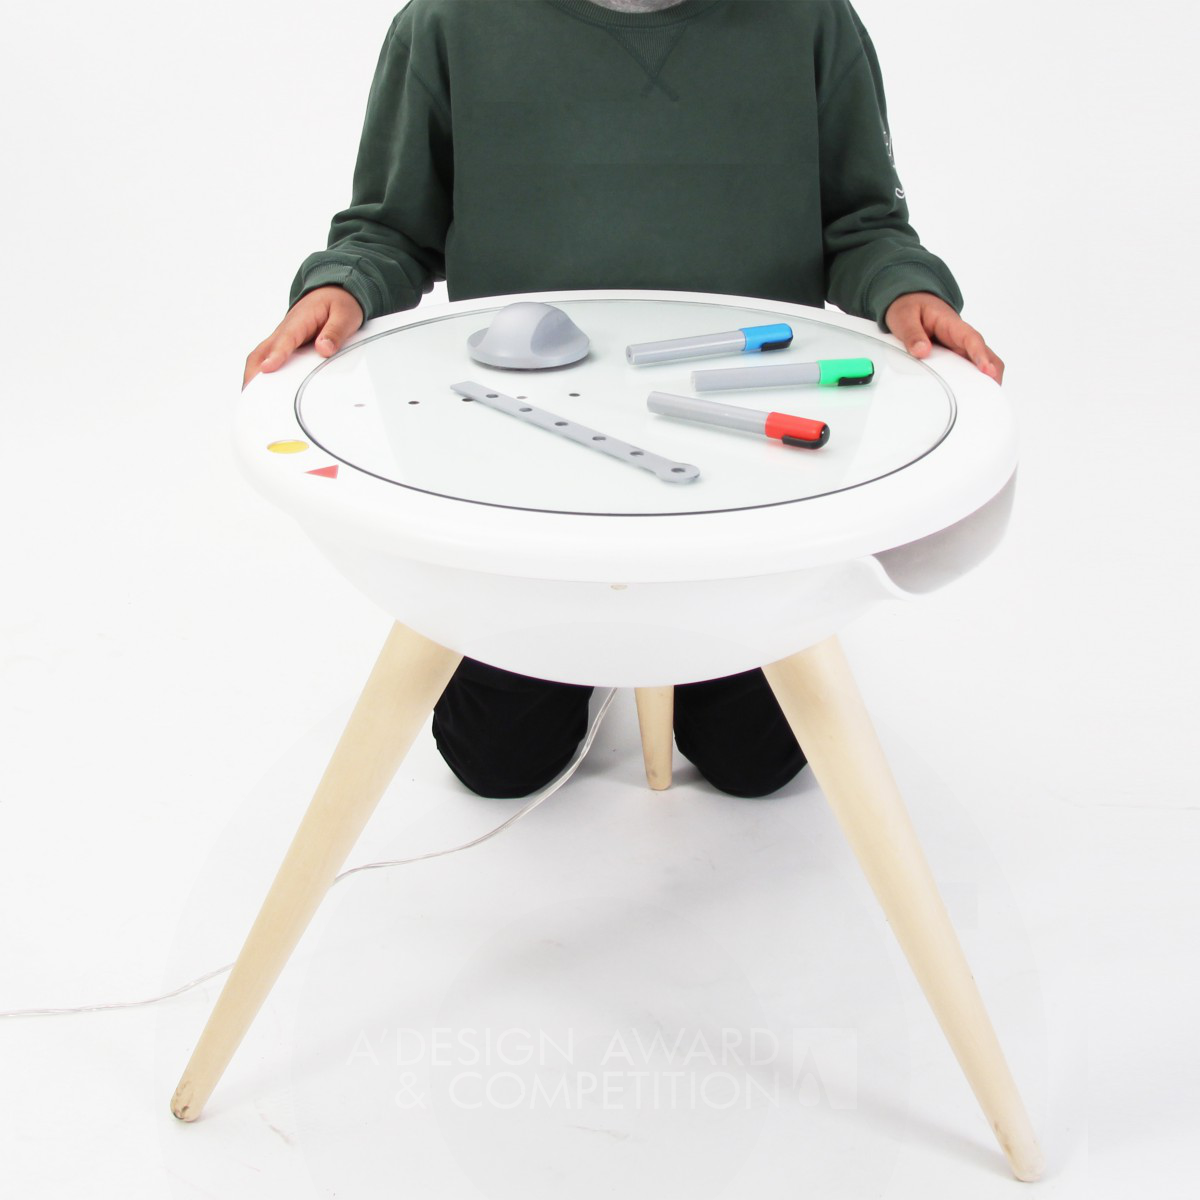 paintable interaction table by Nien-Fu Chen